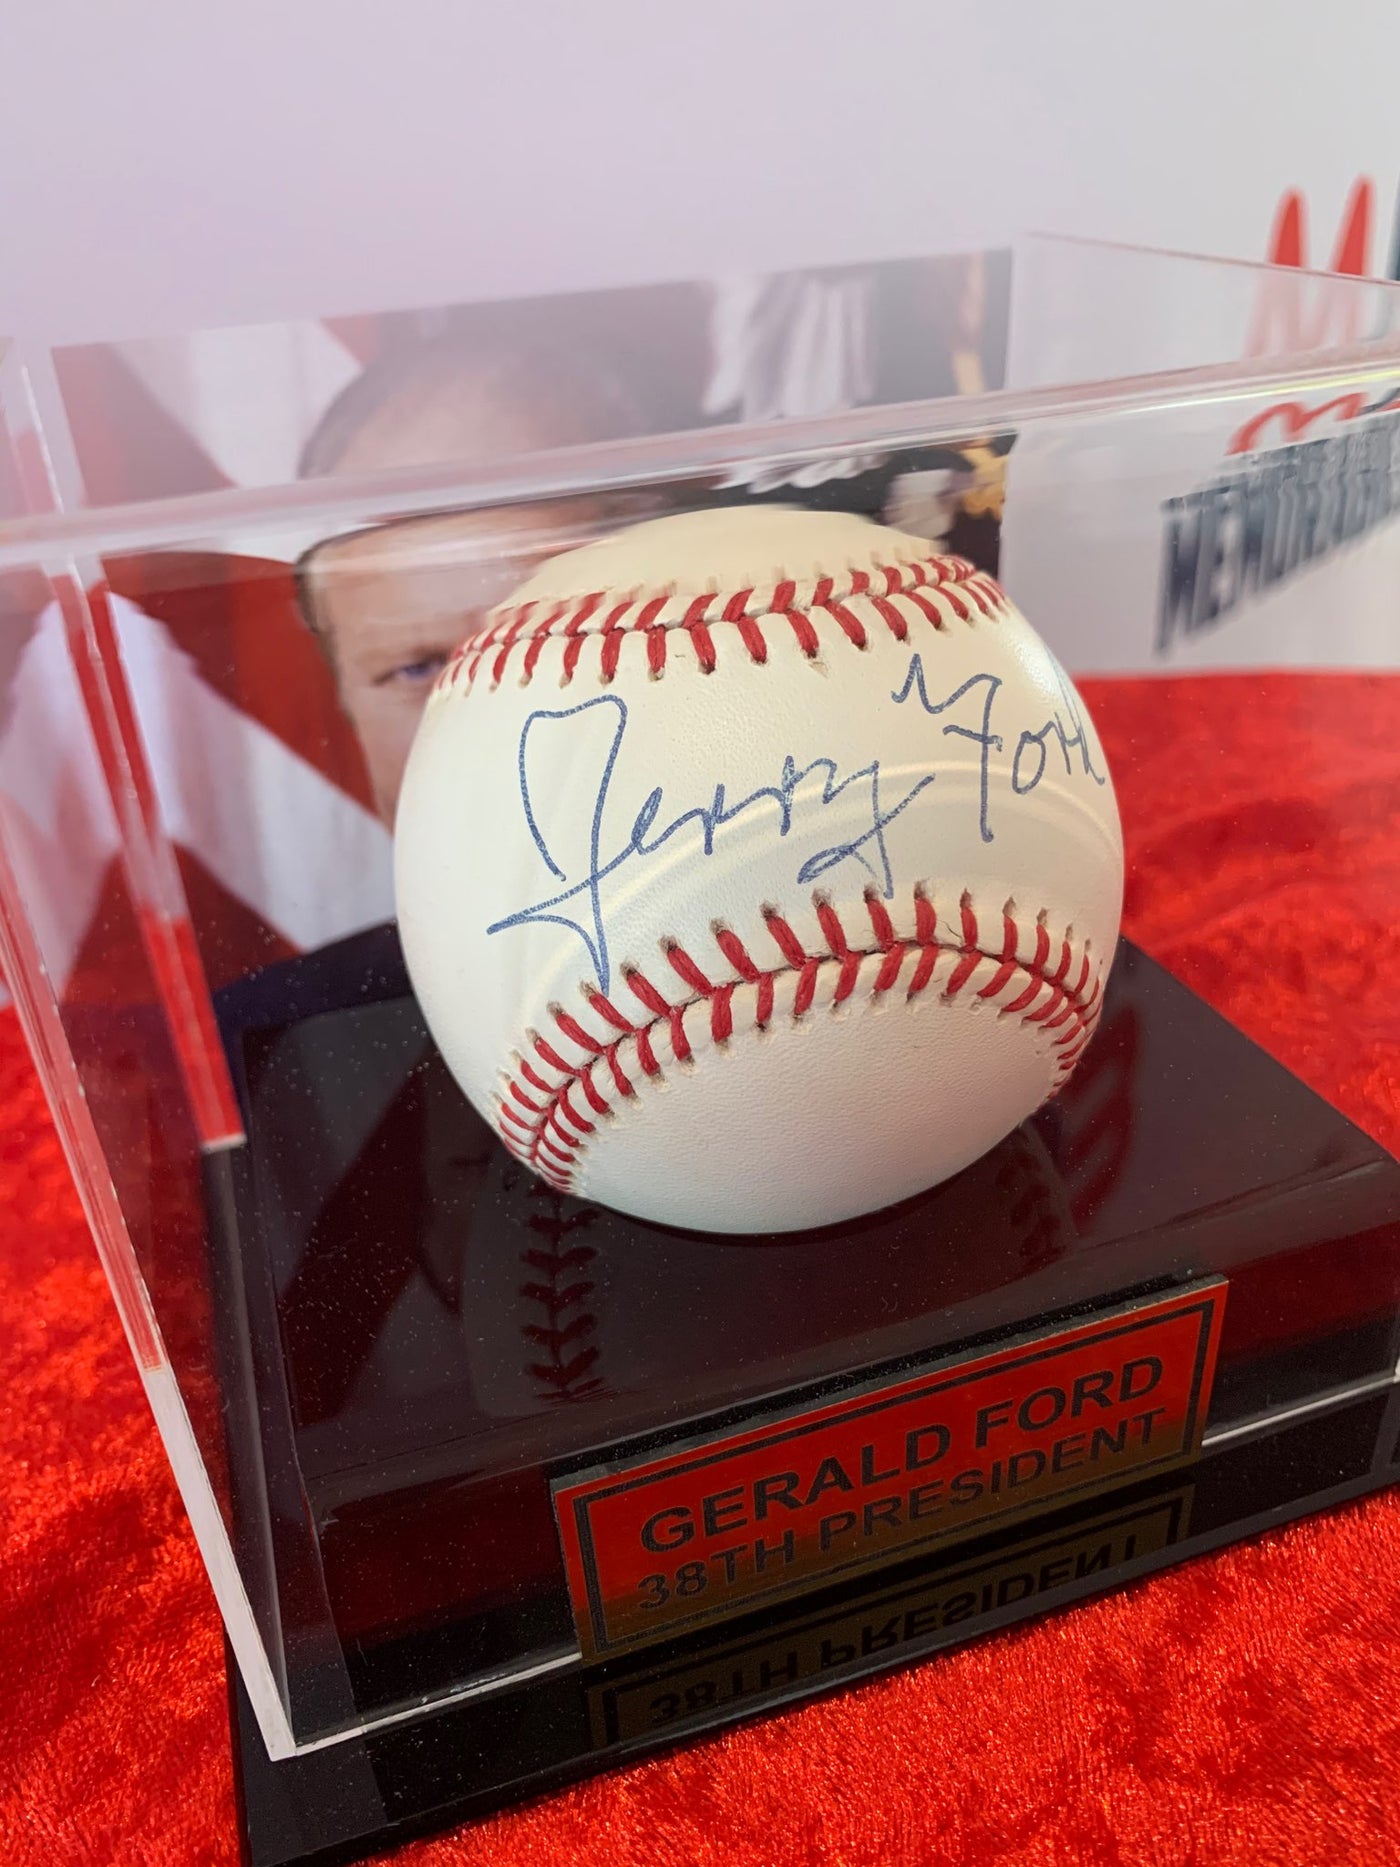 Gerald Ford 38th President of the United States Signed Official Baseball with Beckett COA